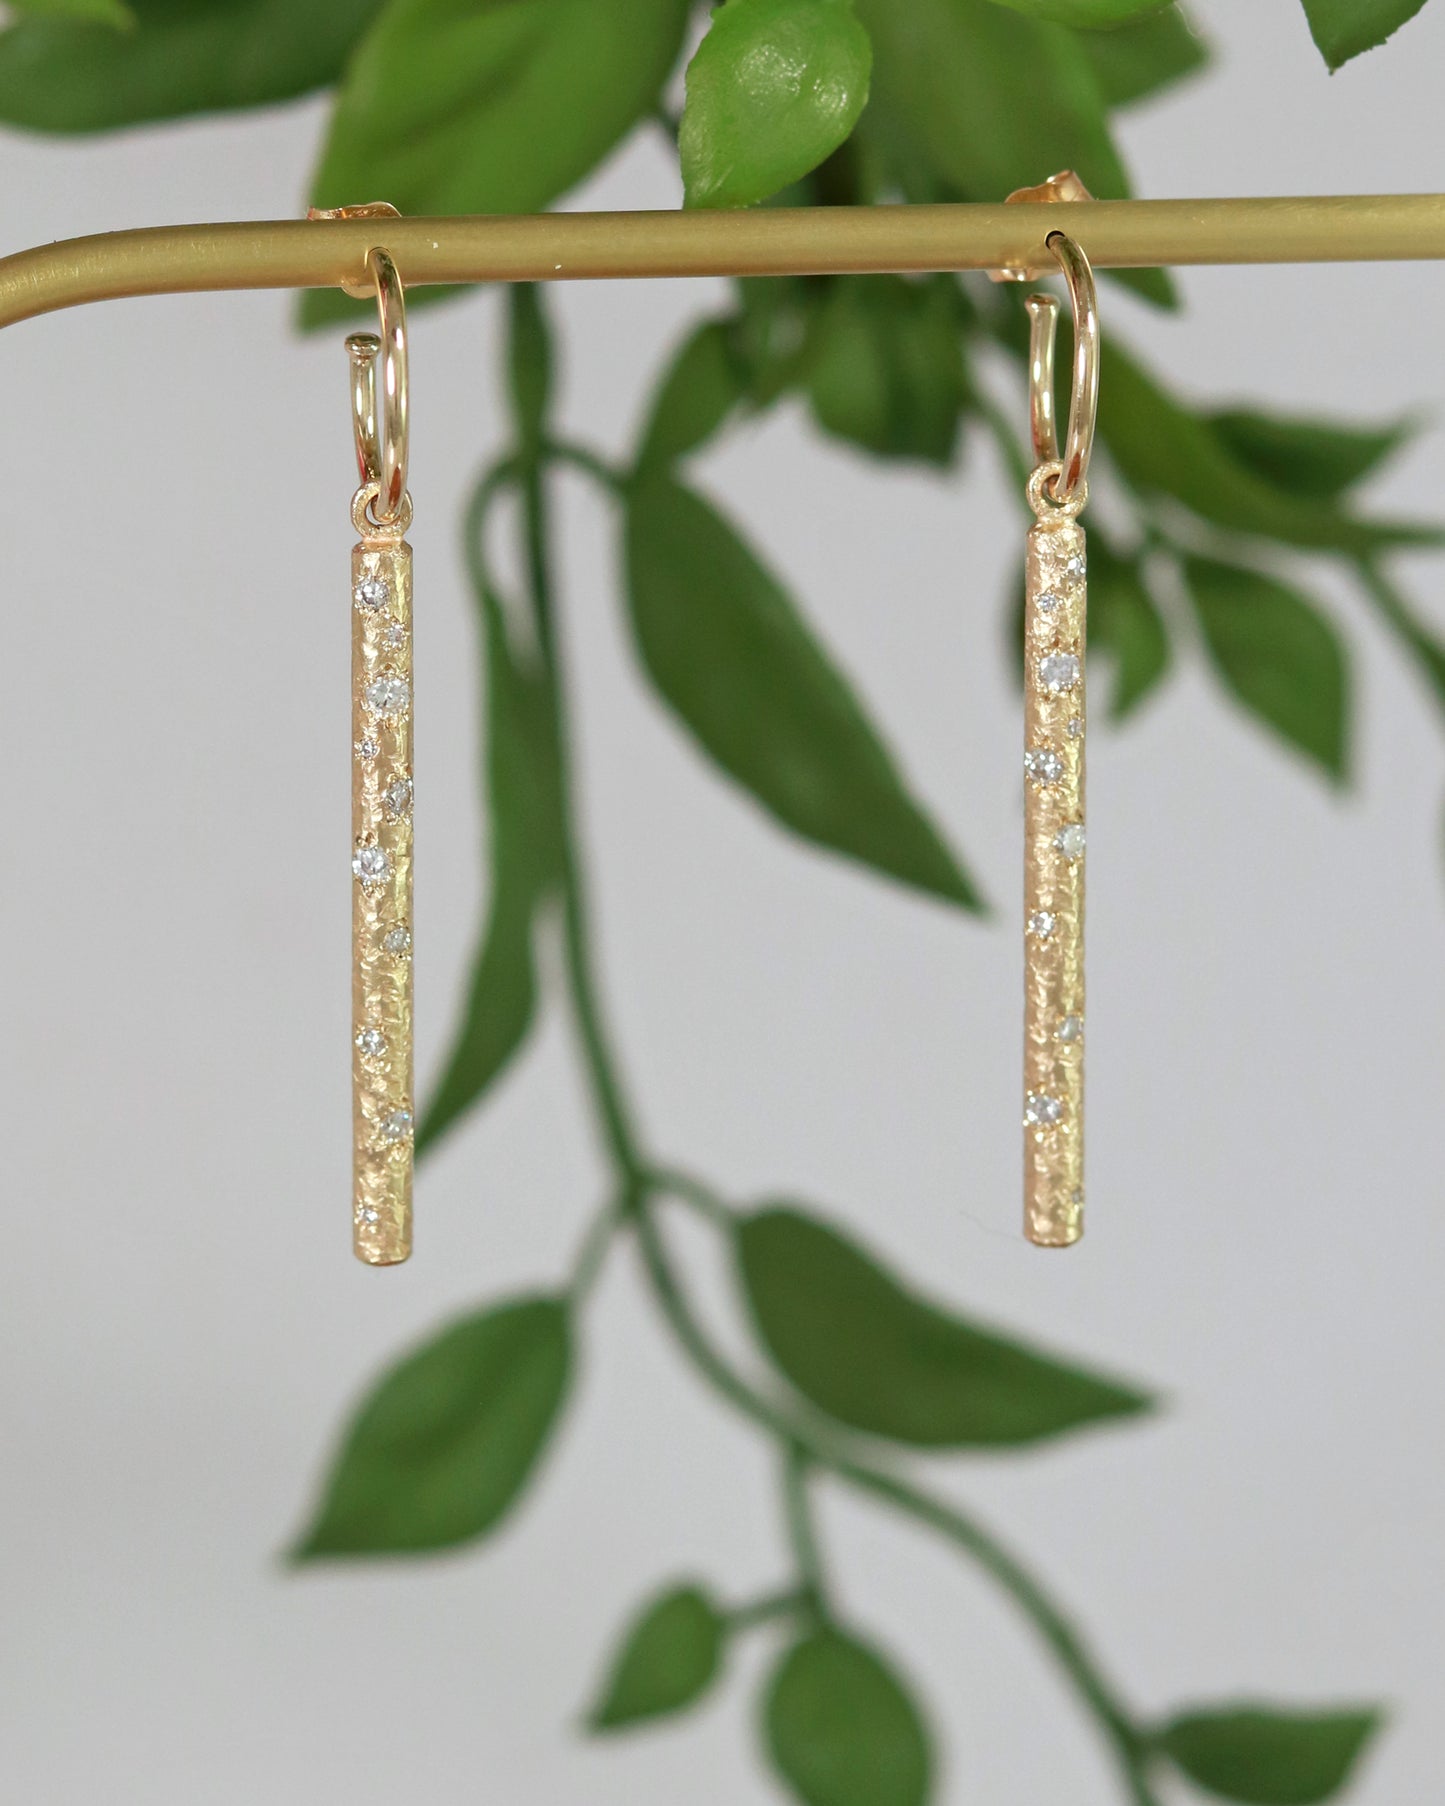 A pair of 14k yellow gold hoops with a solid yellow gold textured bar hanging from the hoop. Each bar has 10 diamonds of various sizes cascading down the bar. 